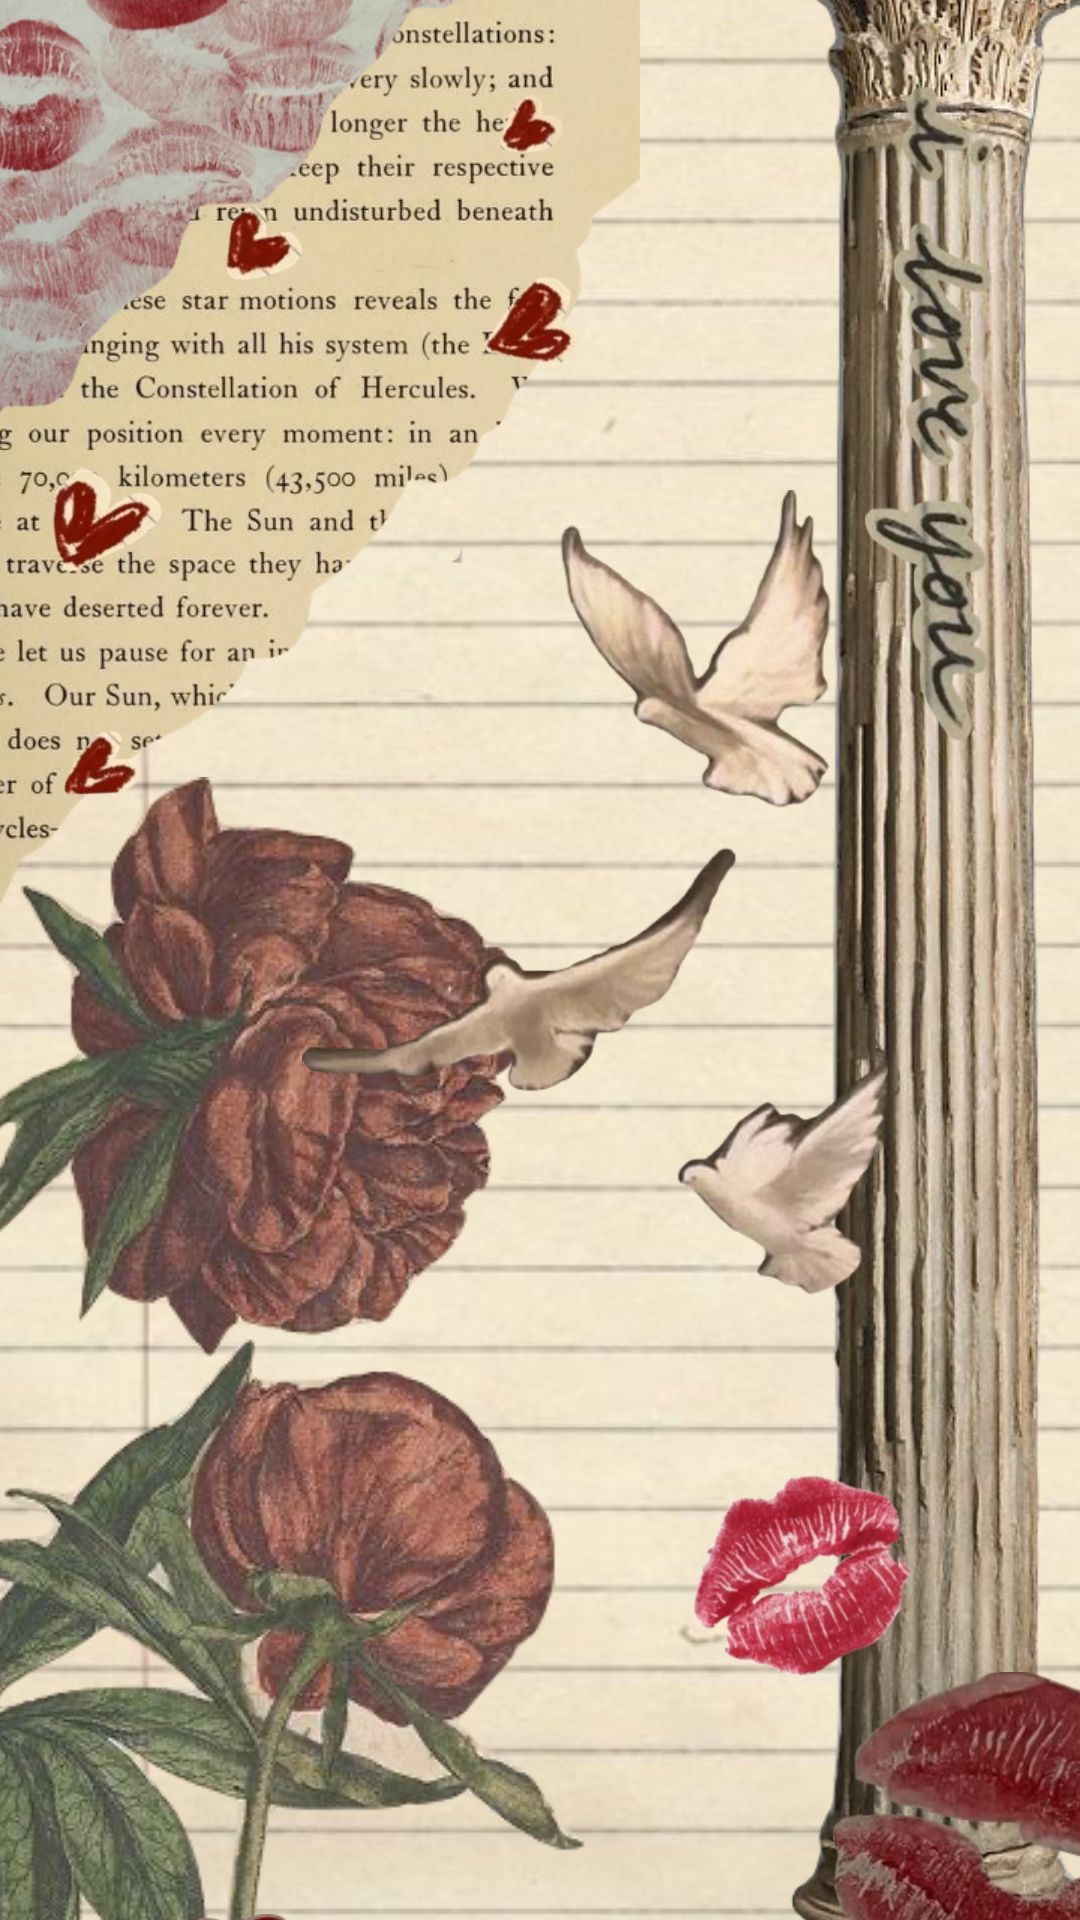 IPhone wallpaper with a vintage aesthetic, featuring a column, doves, a rose, and a lipstick kiss. - IPhone red